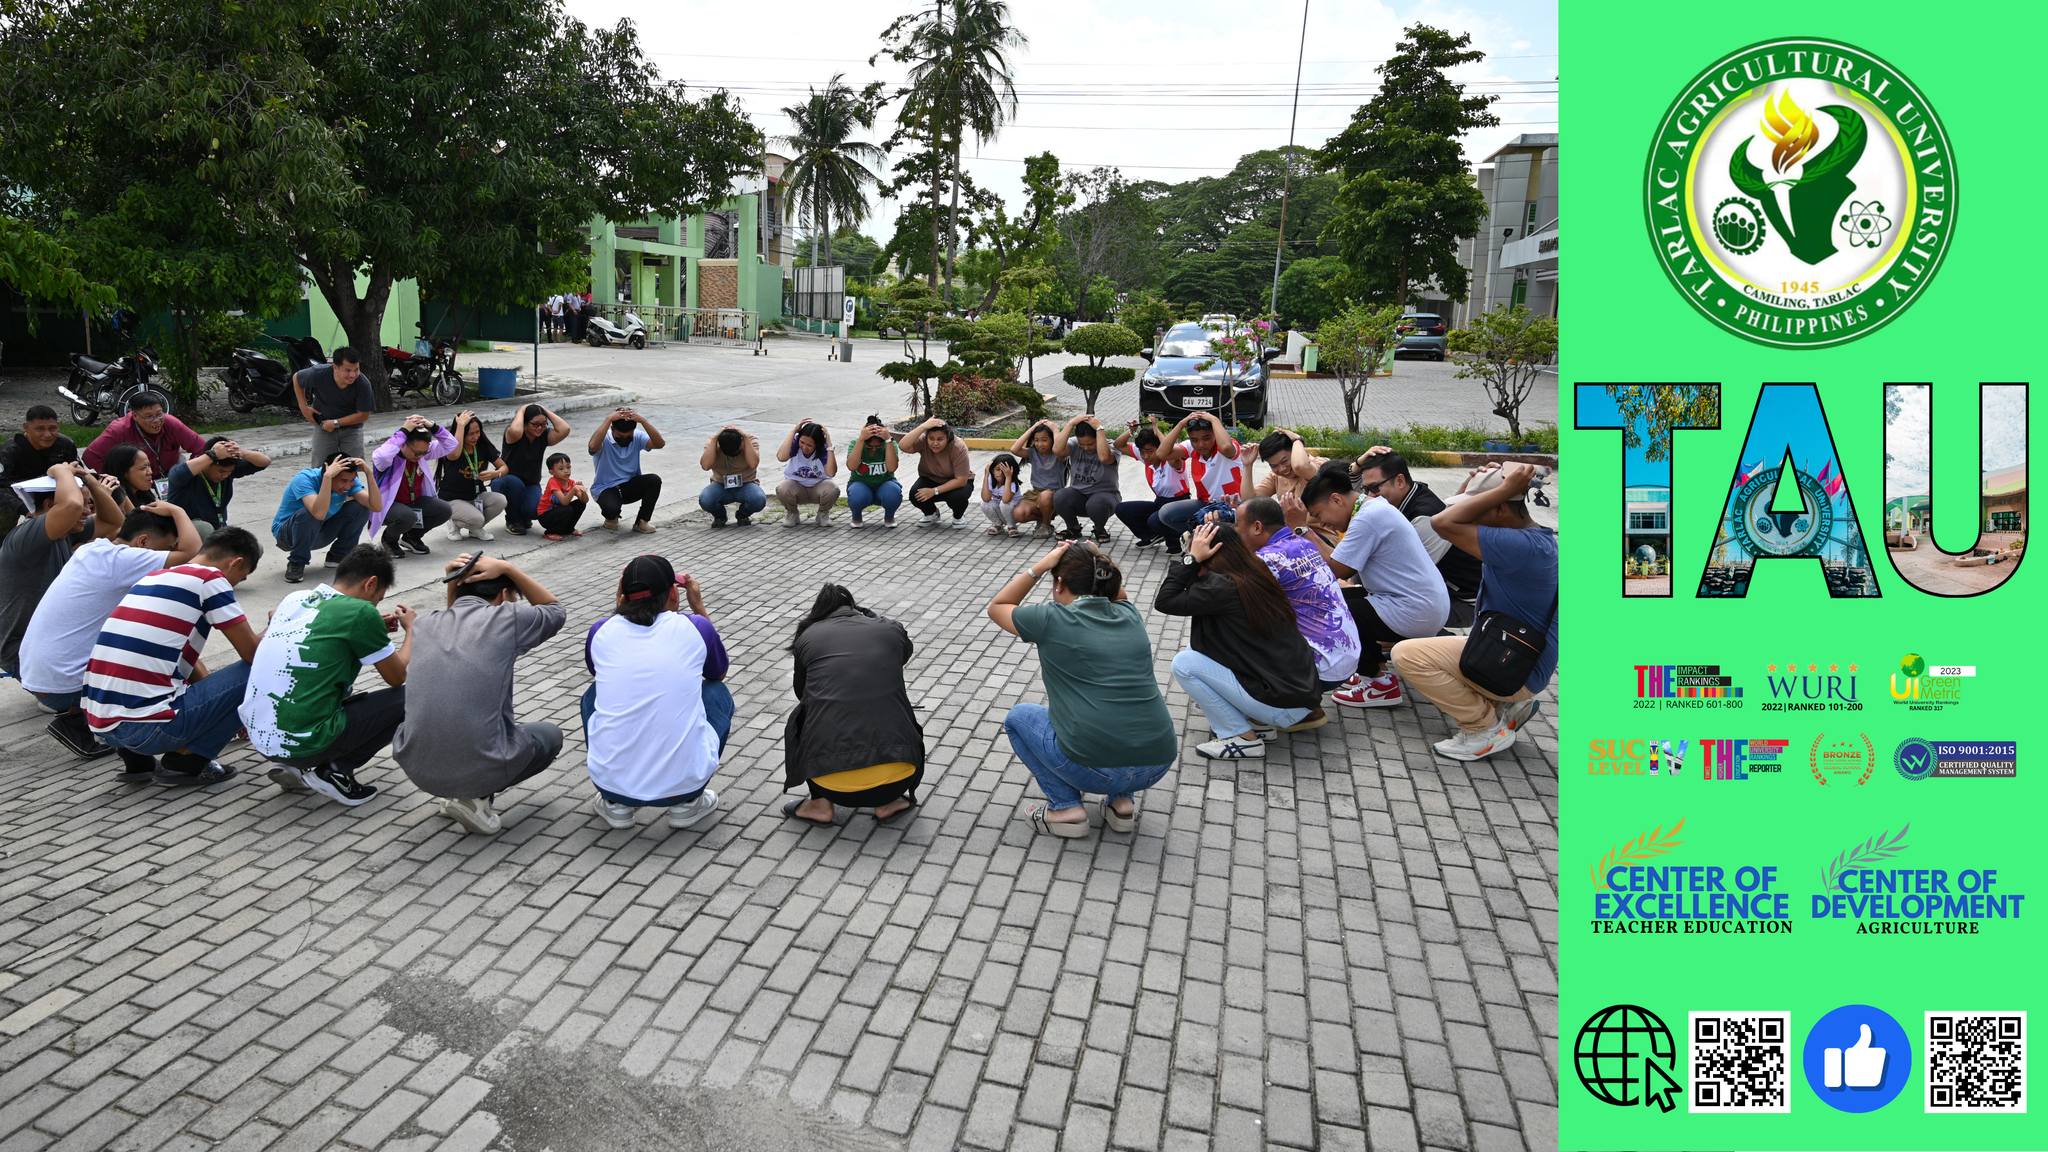 𝐂𝐀𝐏𝐓𝐔𝐑𝐄𝐃 𝐈𝐍 𝐋𝐄𝐍𝐒 | Despite engaging in various activities on a busy Friday, 28 June, the employees, staff, and students of Tarlac Agricultural University (TAU) join the 2nd Quarter Nationwide Simultaneous Earthquake Drill (NSED) 2024, demonstrating their preparedness and commitment to safety.